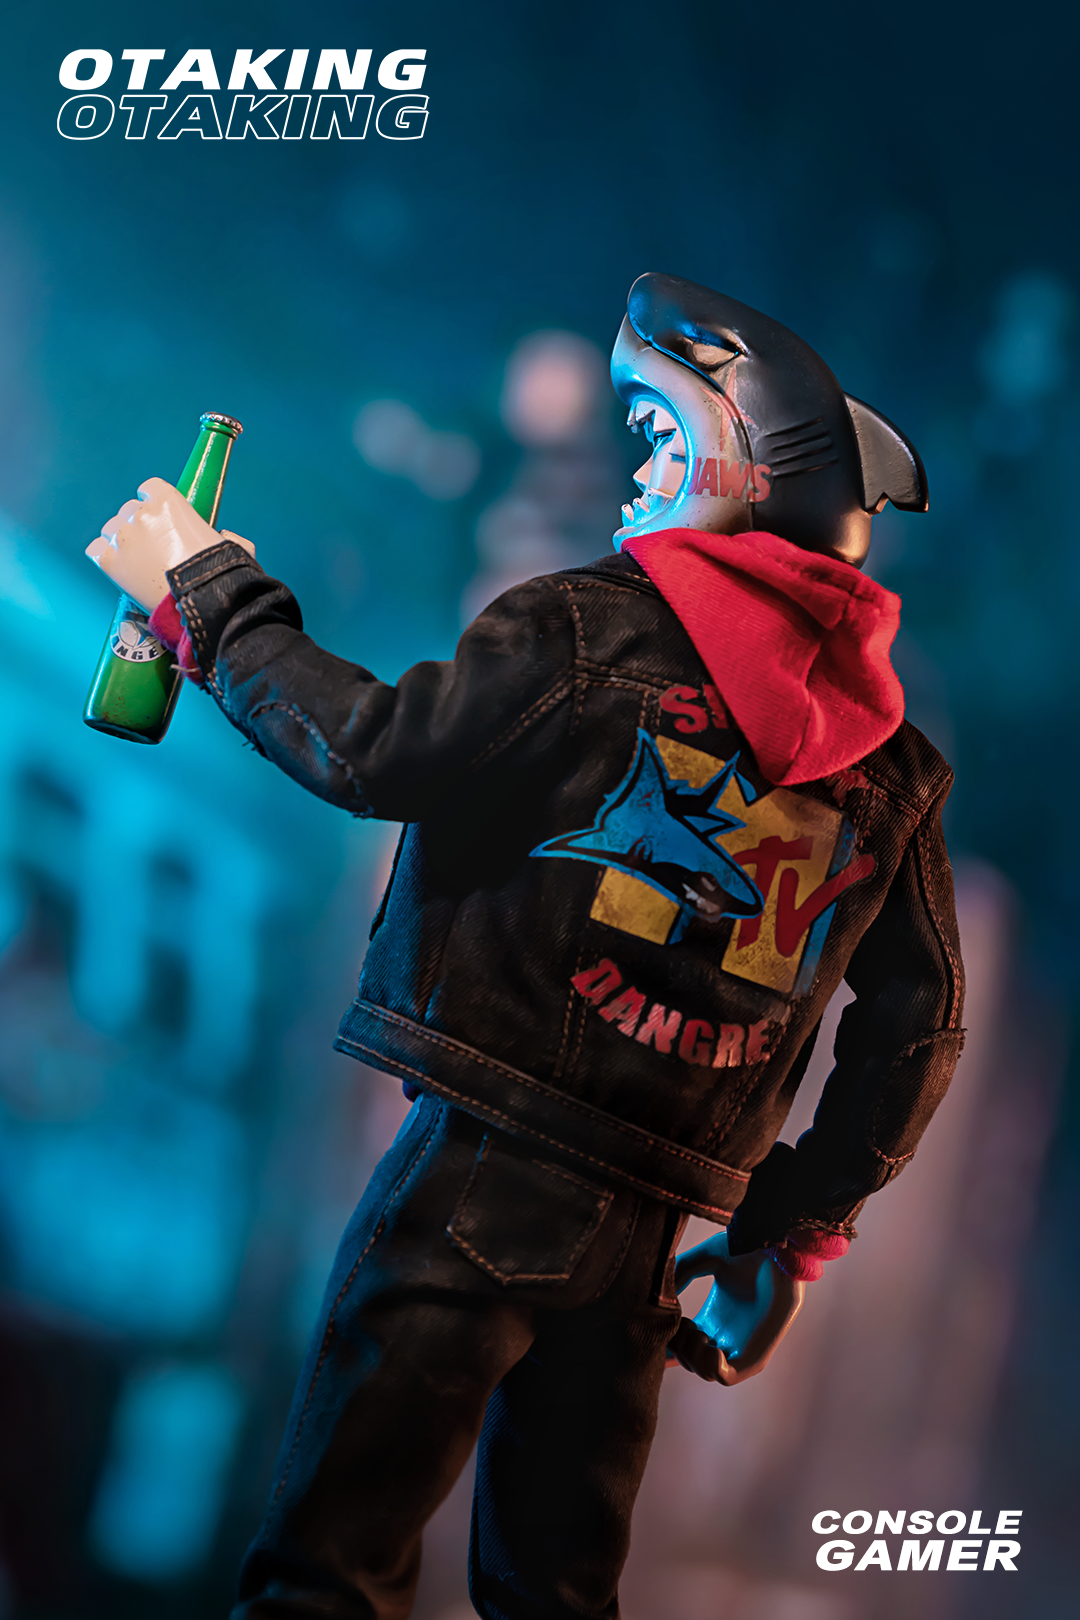 Preorder OTAKING - Console Gamer action figure with TV and Shark Heads, beer bottle, and accessories.